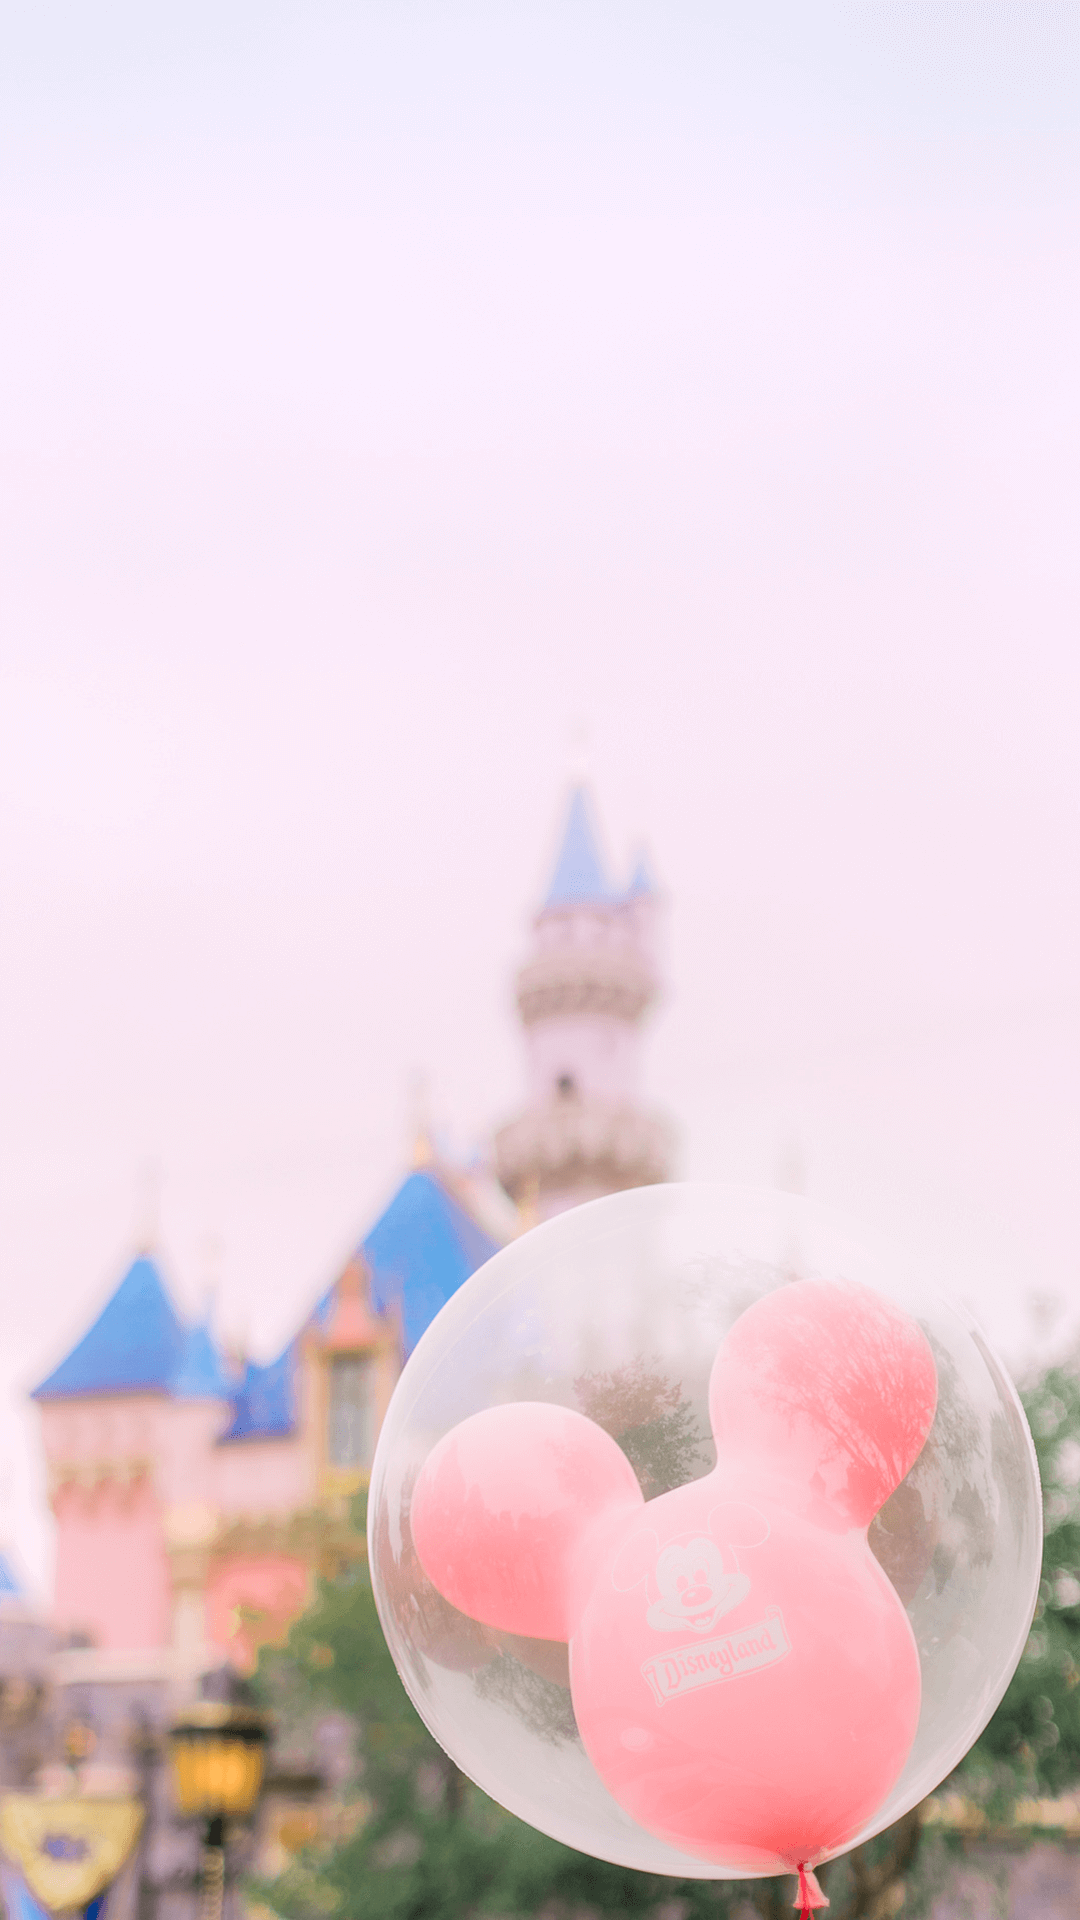 My favorite part of going to any Disney park is the wonderful colors! These dreamy Disneyland wallpapers caputre a pastel magic for your mobile phone.